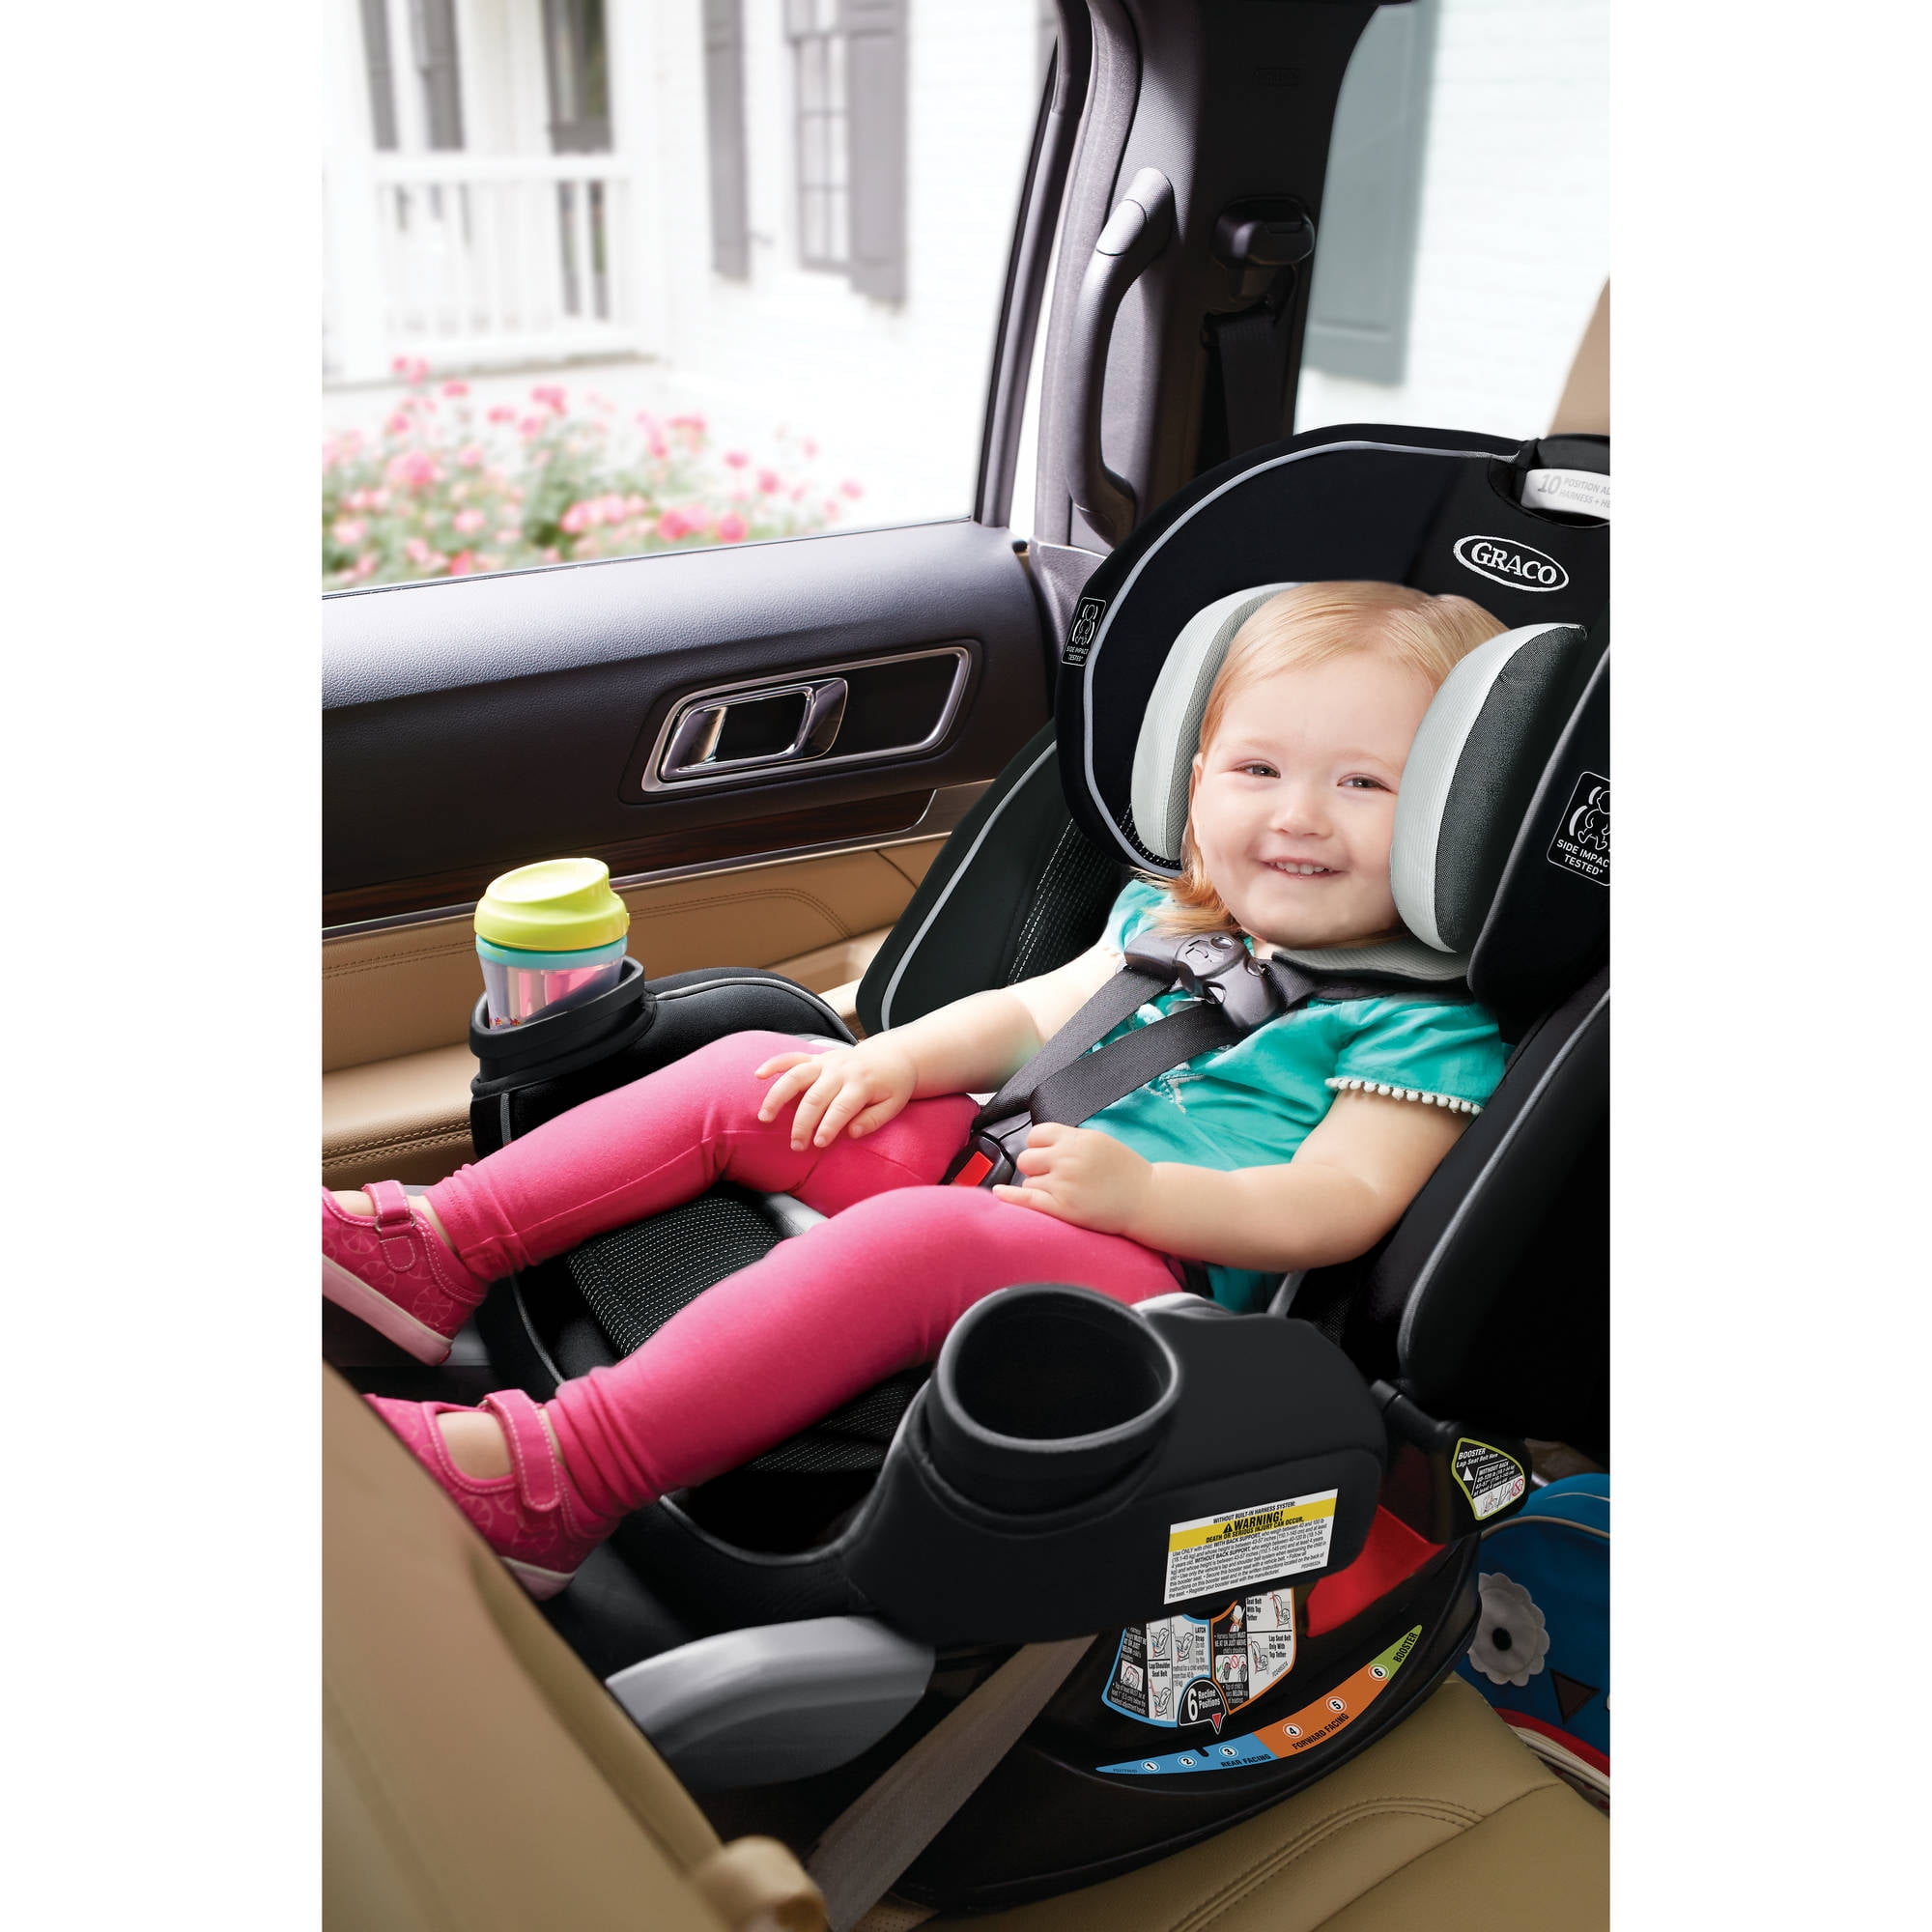 graco baby extend2fit convertible car seat